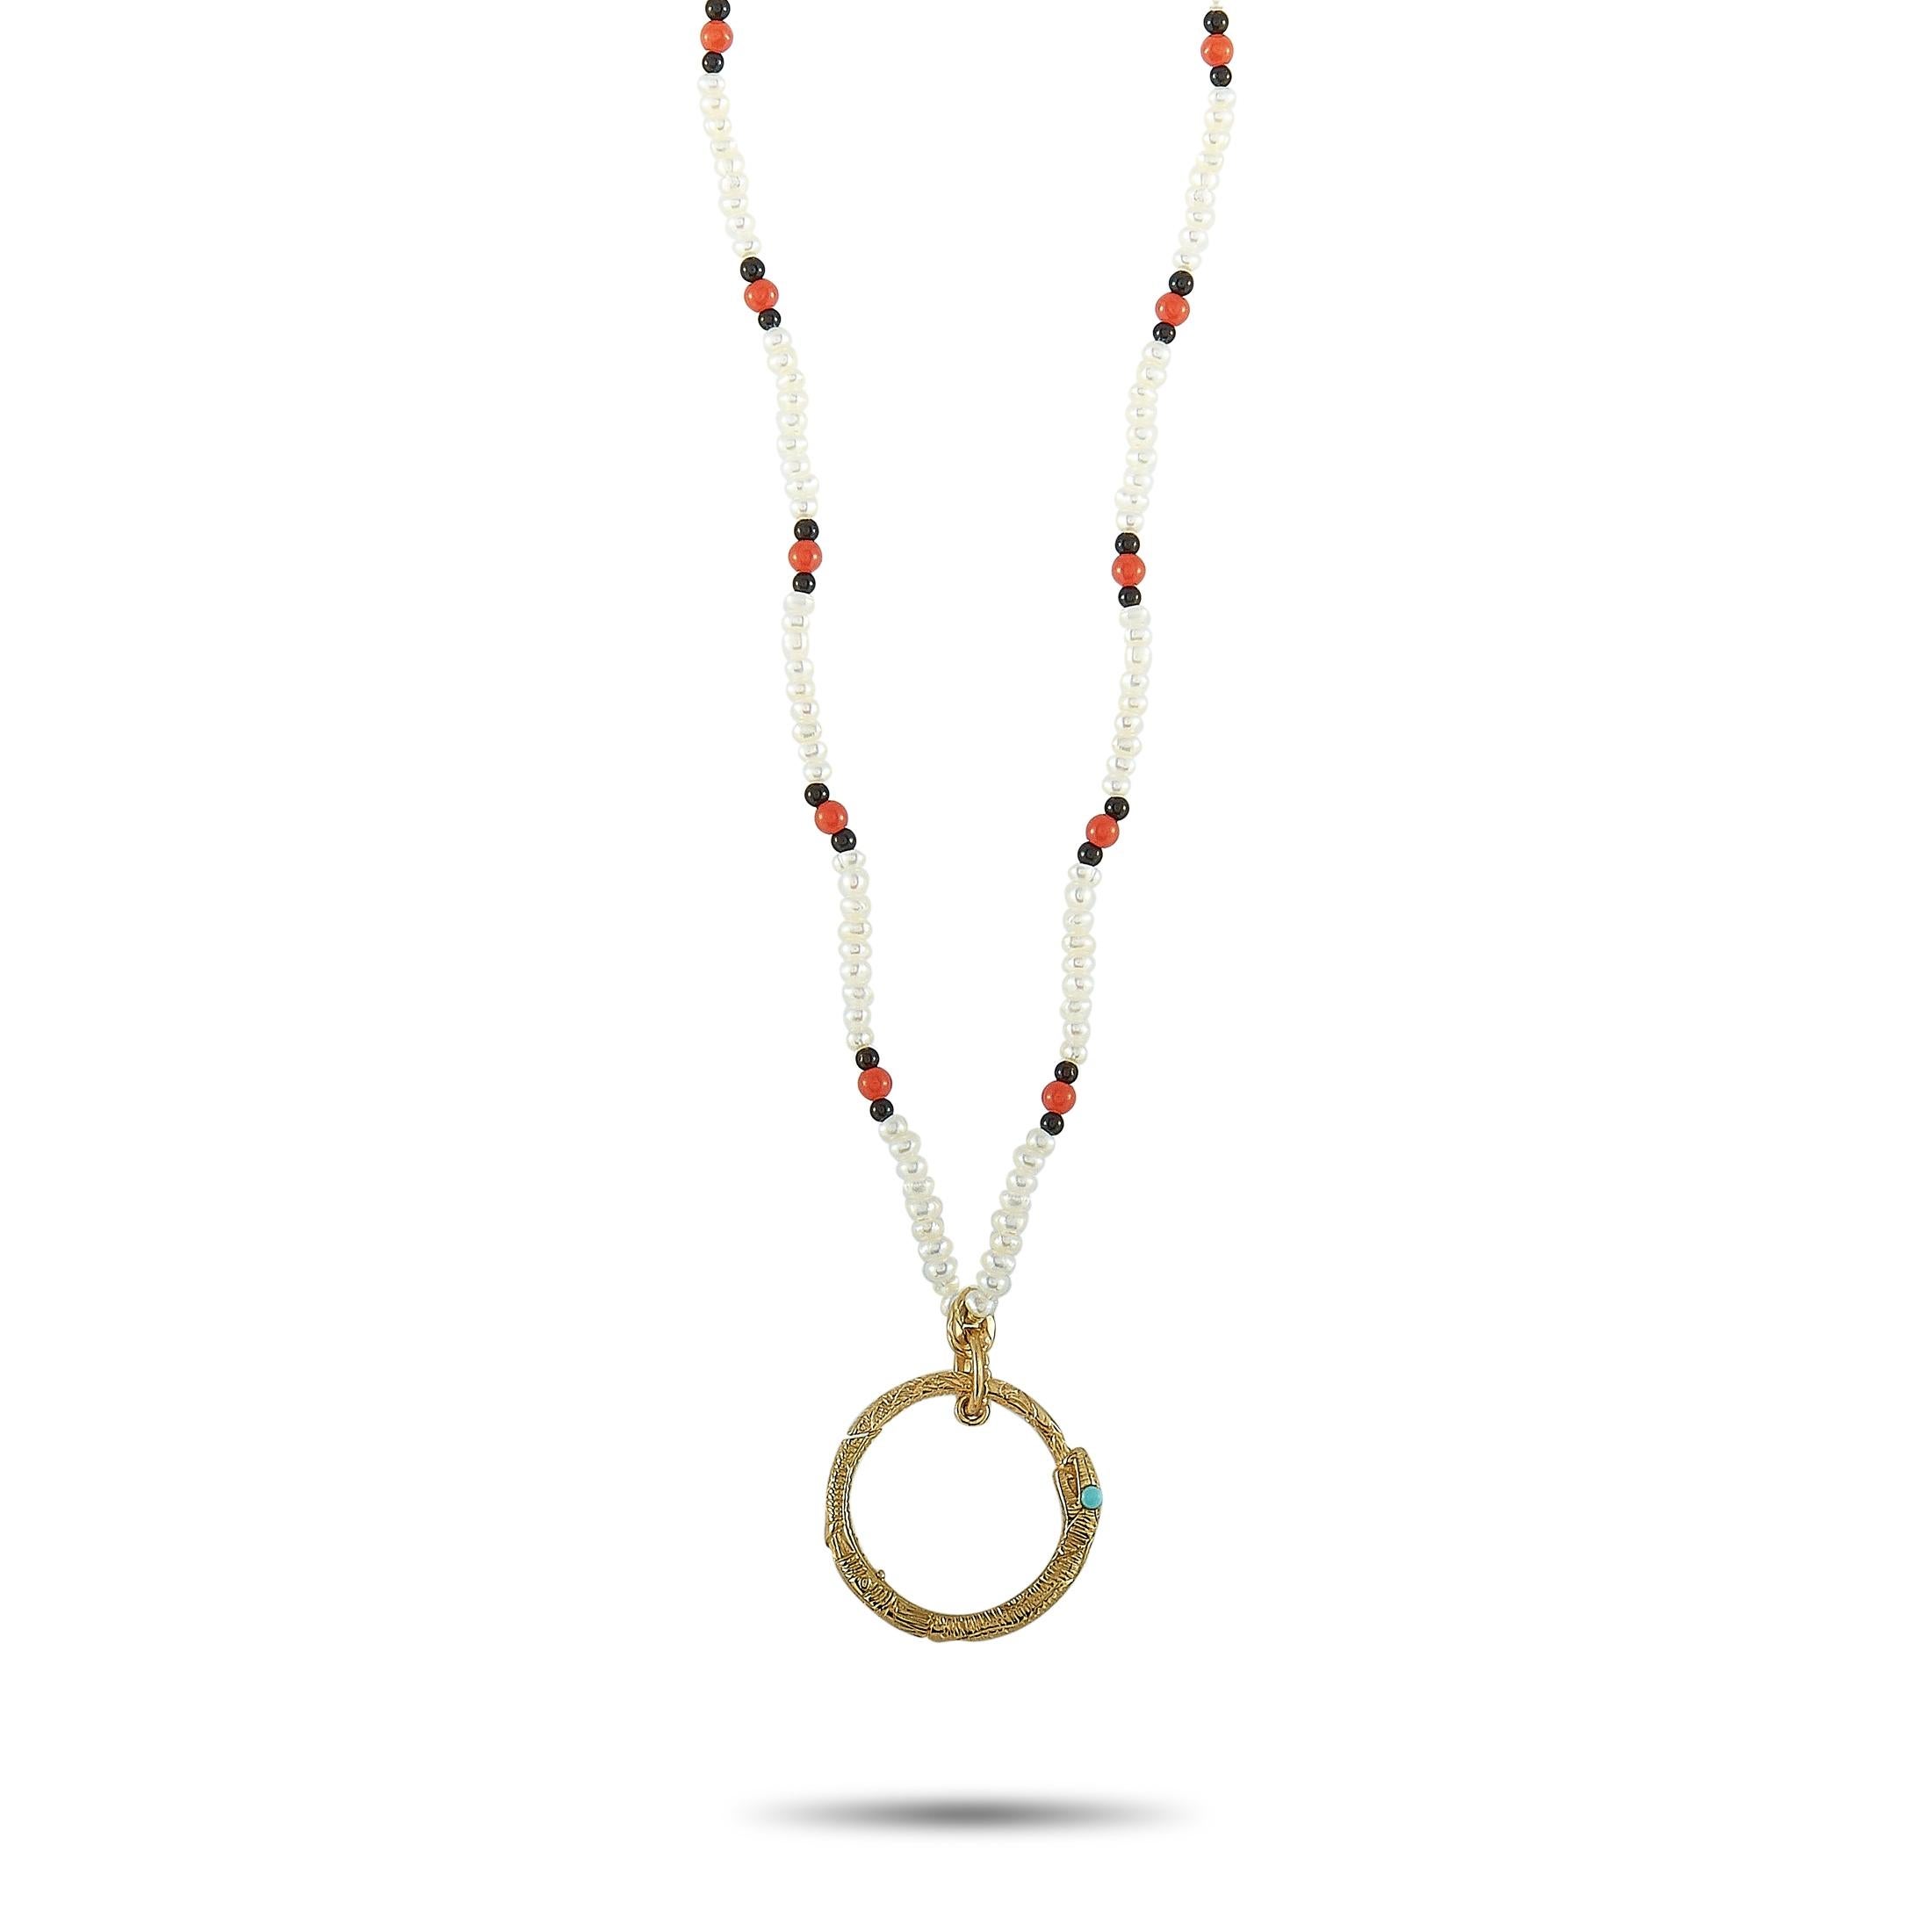 The Gucci “Ouroboros” necklace is made of 18K yellow gold and embellished with pearls and turquoise, coral, and onyx stones. The necklace weighs 7 grams and measures 22” in length, boasting a 1” by 0.75” pendant.
 
 This jewelry piece is offered in